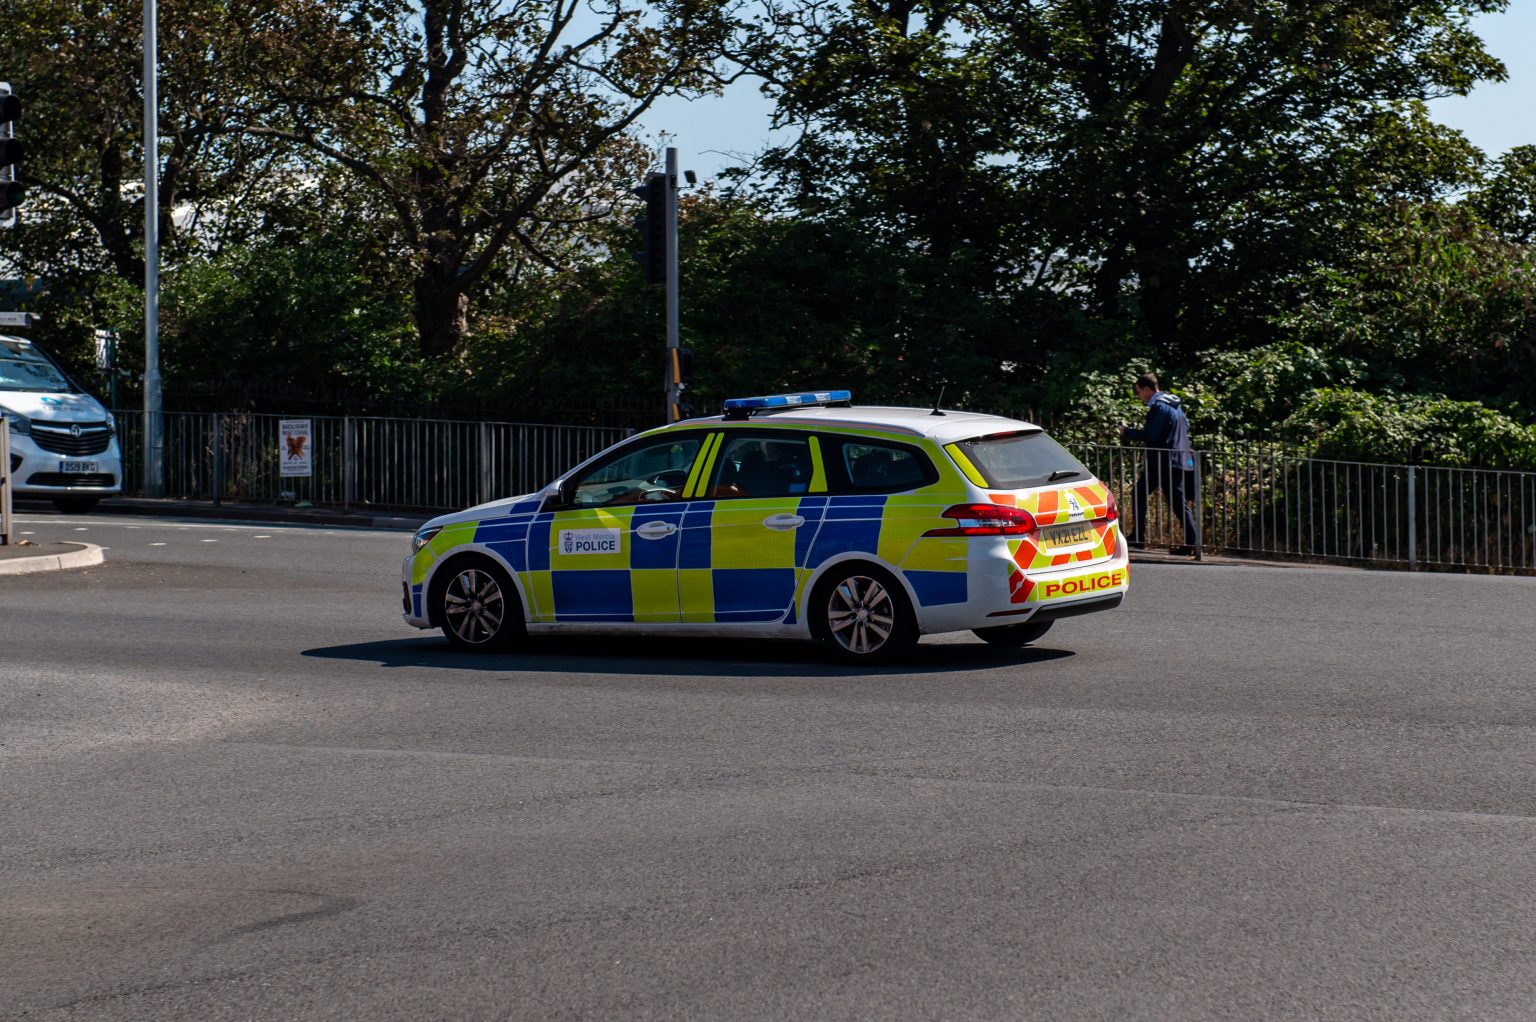 NEWS | Police appeal after a female was injured in an incident in August